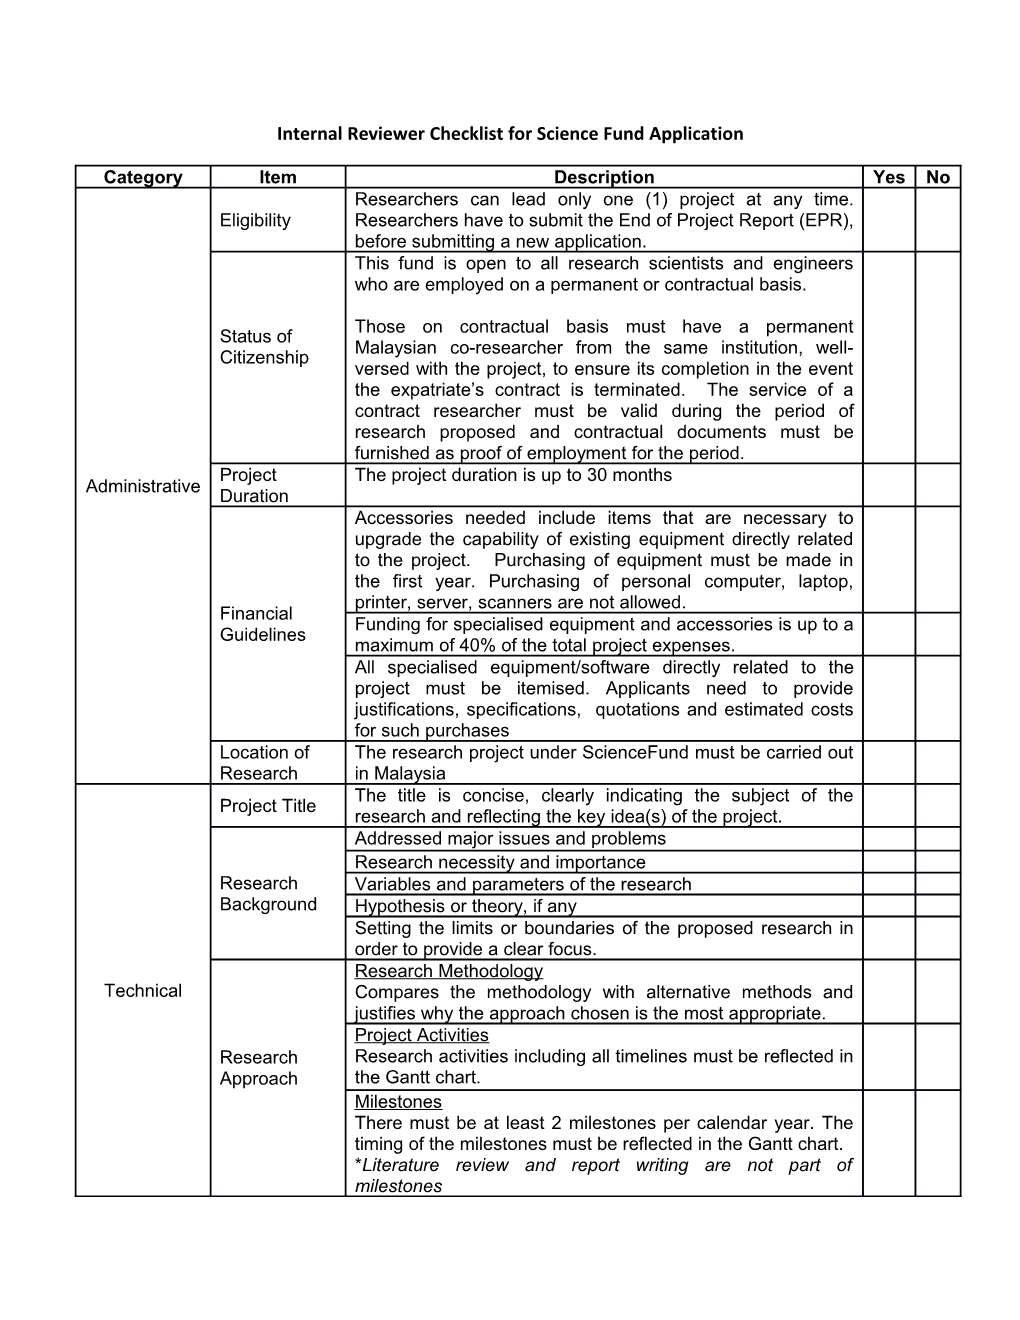 Internal Reviewer Checklist for Science Fund Application